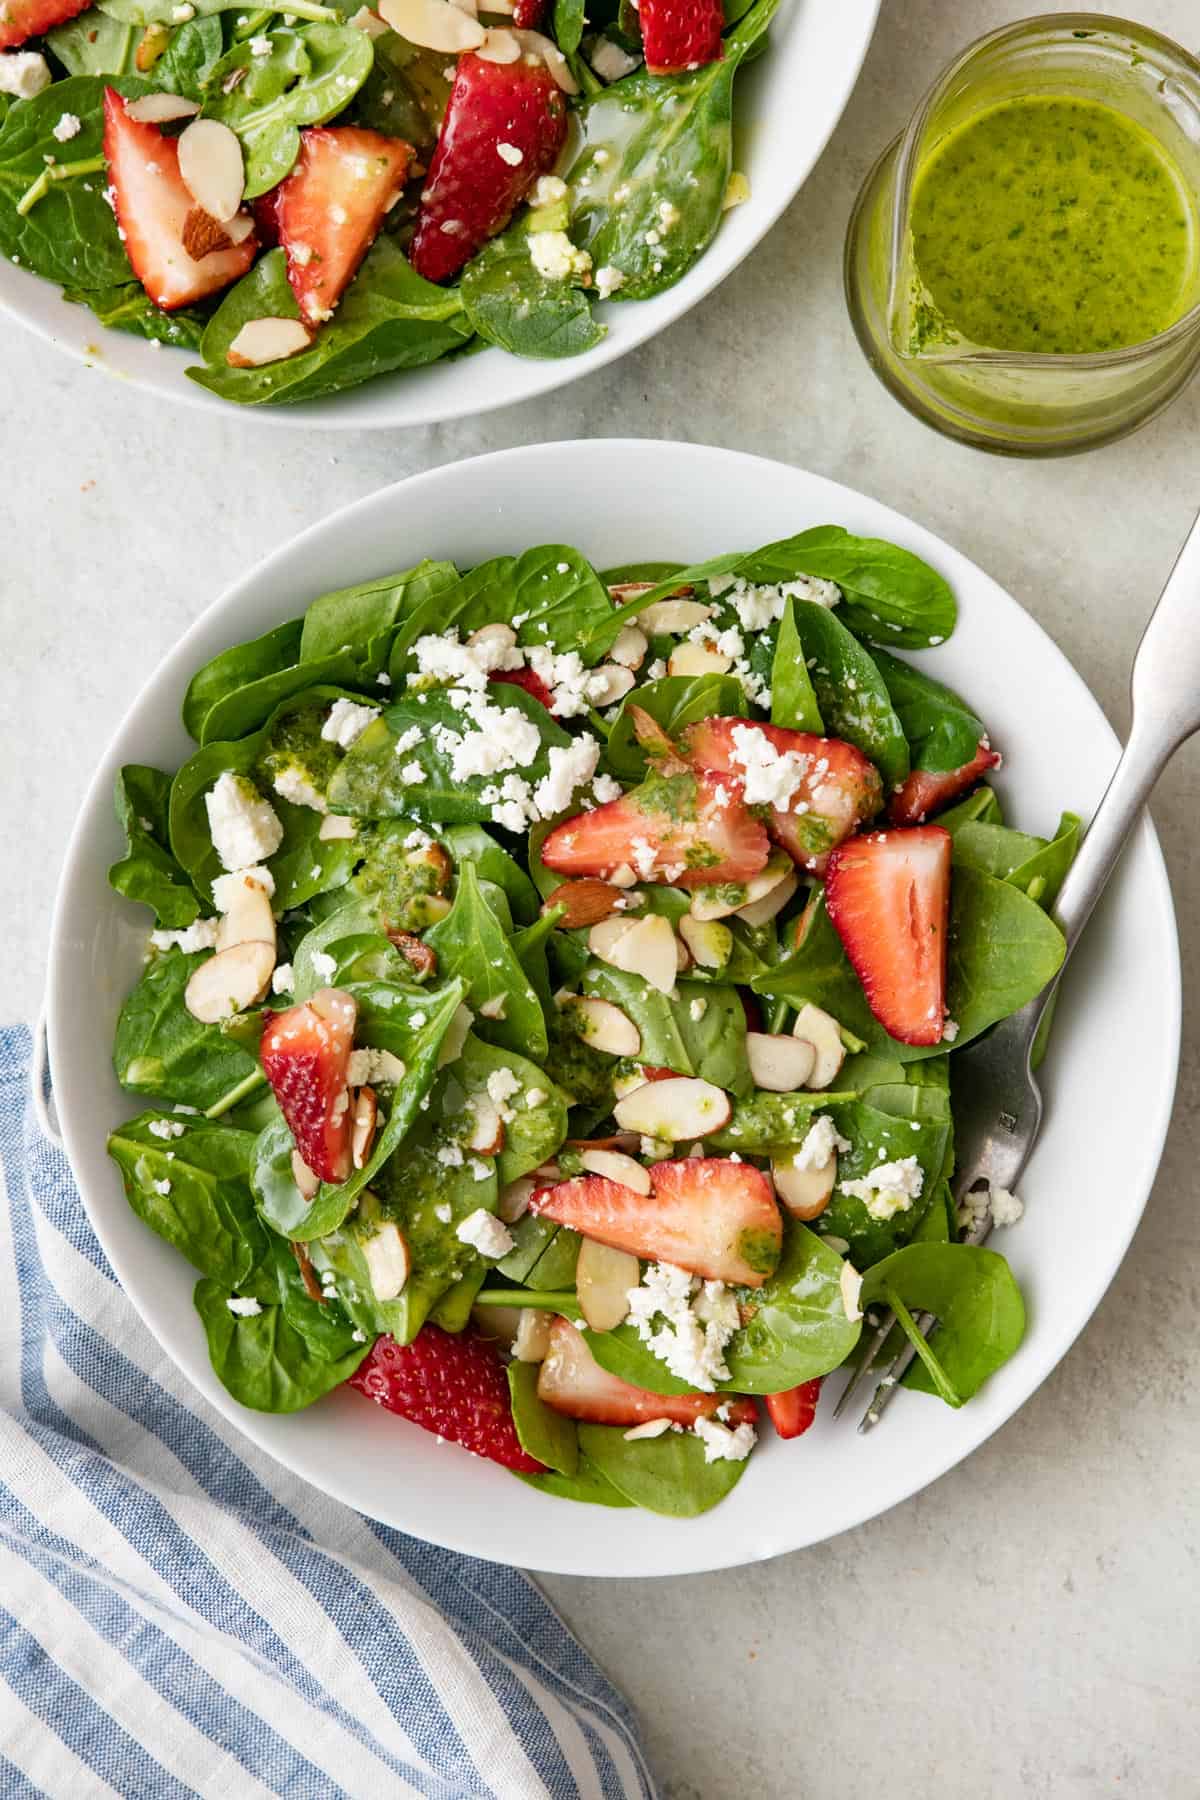 Two bowls of spinach strawberry salad with a bright green vinaigrette in a glass jar nearby.